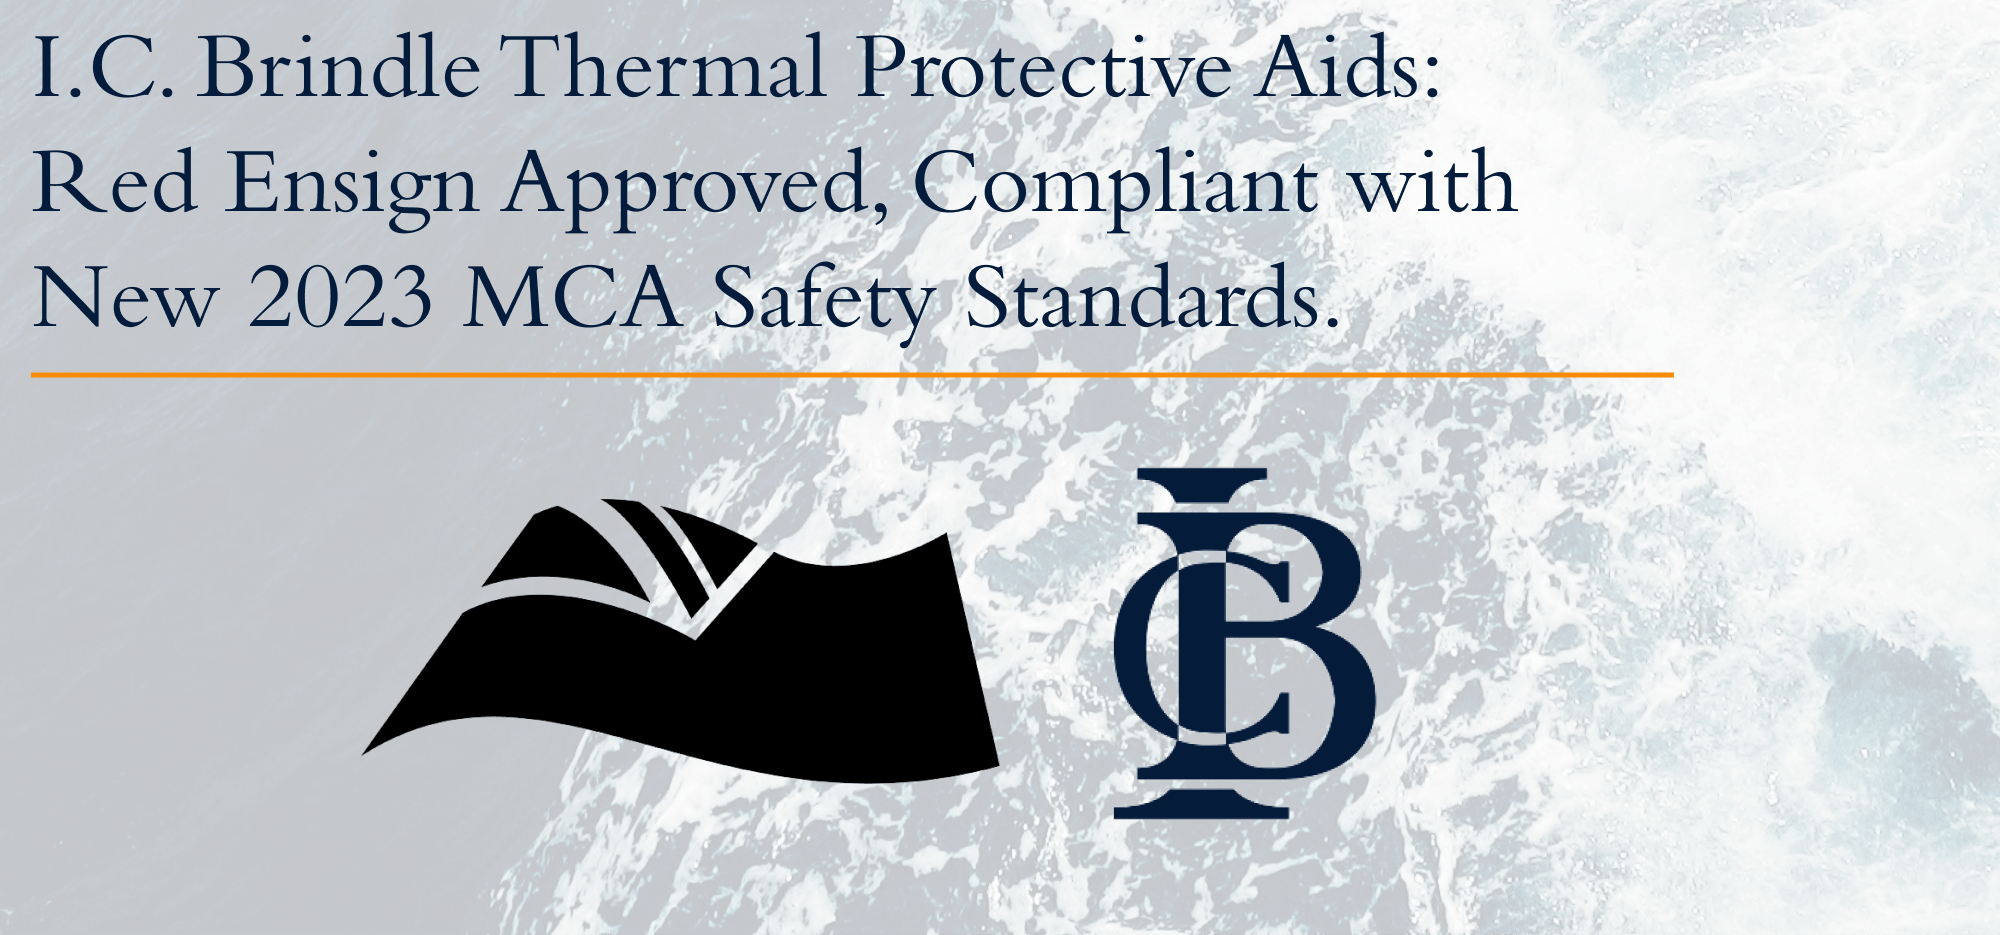 I.C. Brindle & Co Ltd: Red Ensign Approved, Compliant with New 2023 MCA Safety Standards